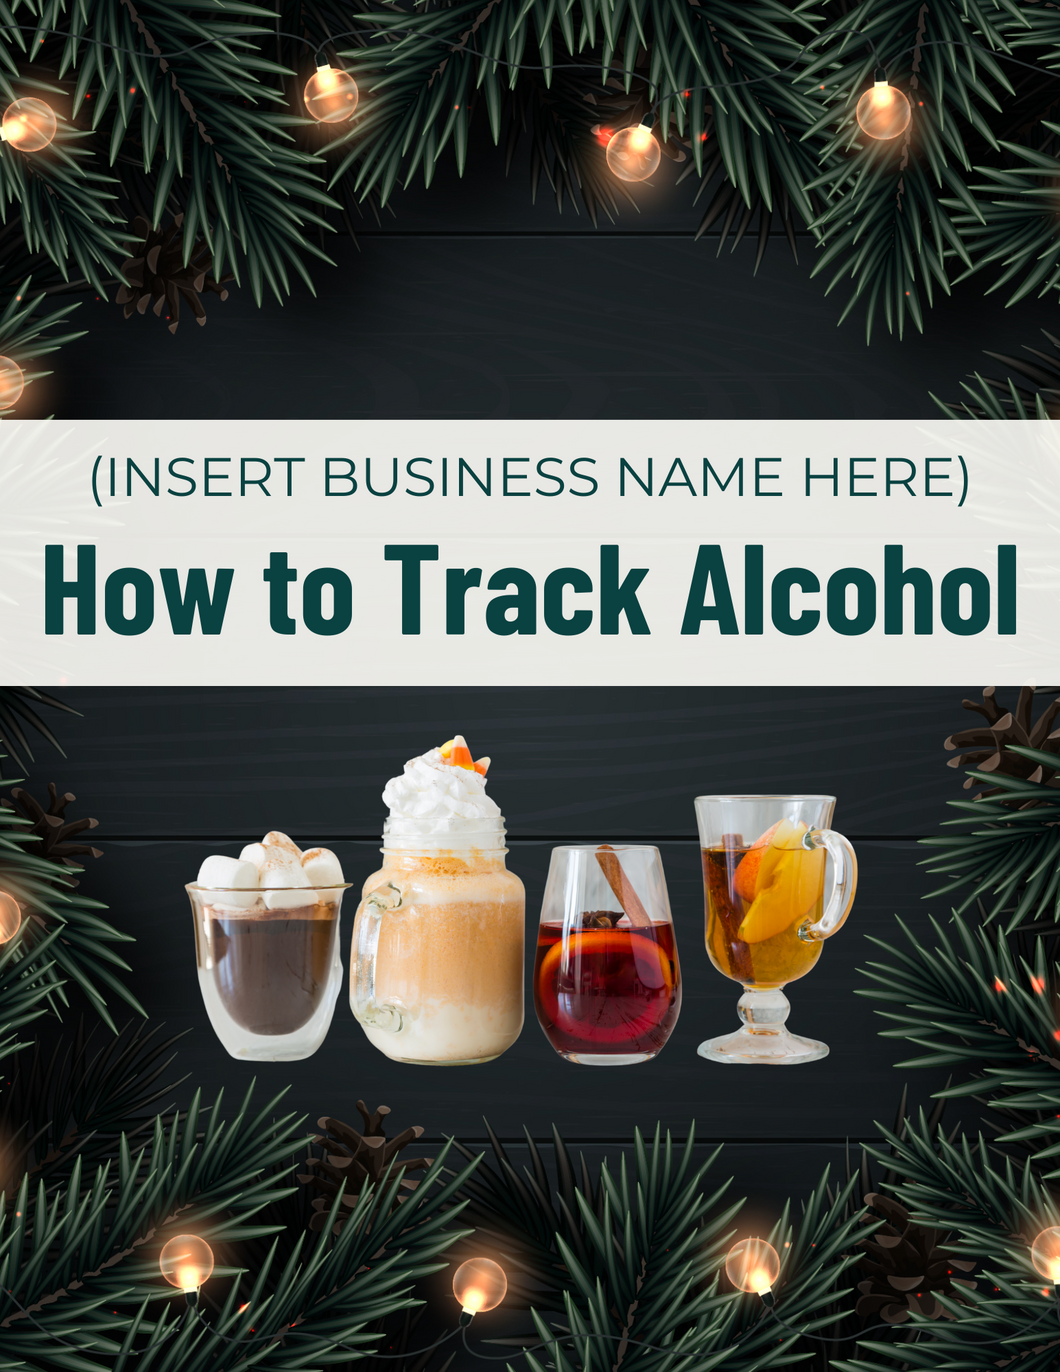 How to Track Alcohol